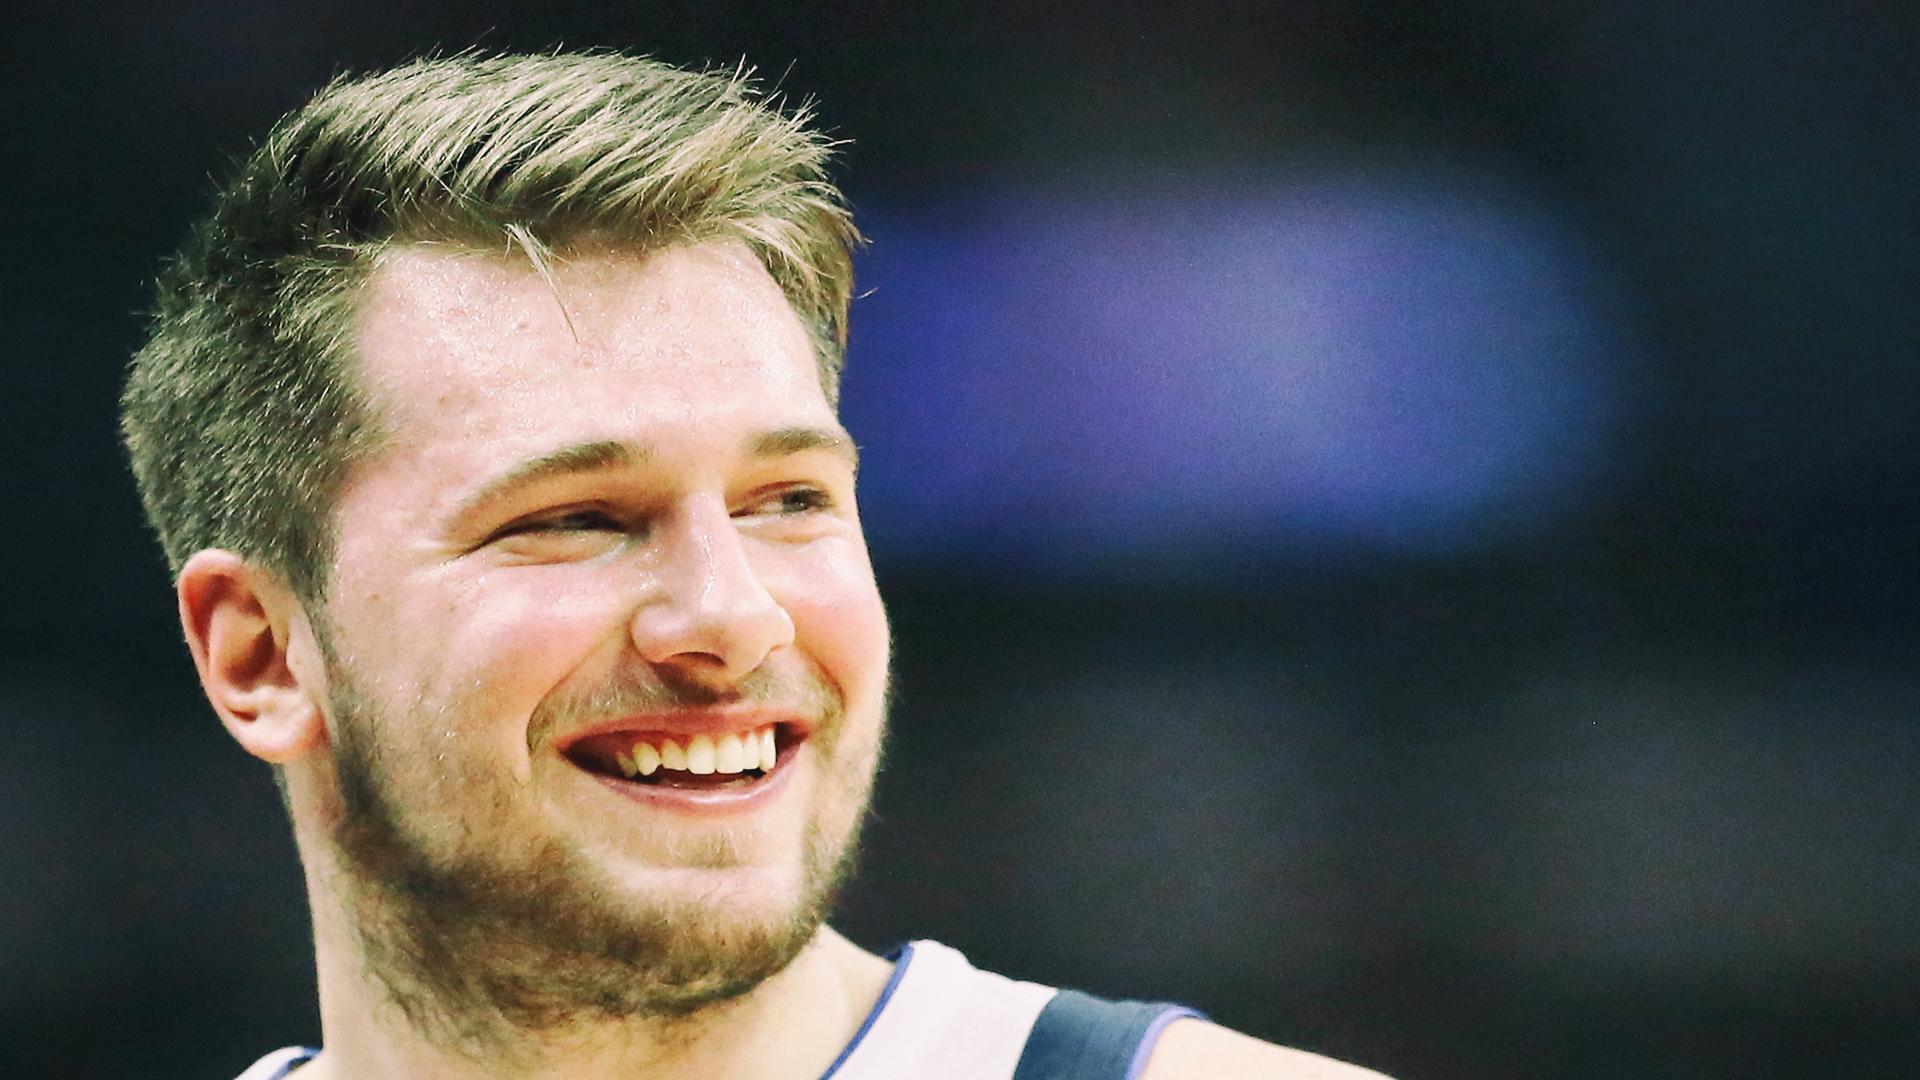 Doncic's magical NBA plays as a teenager